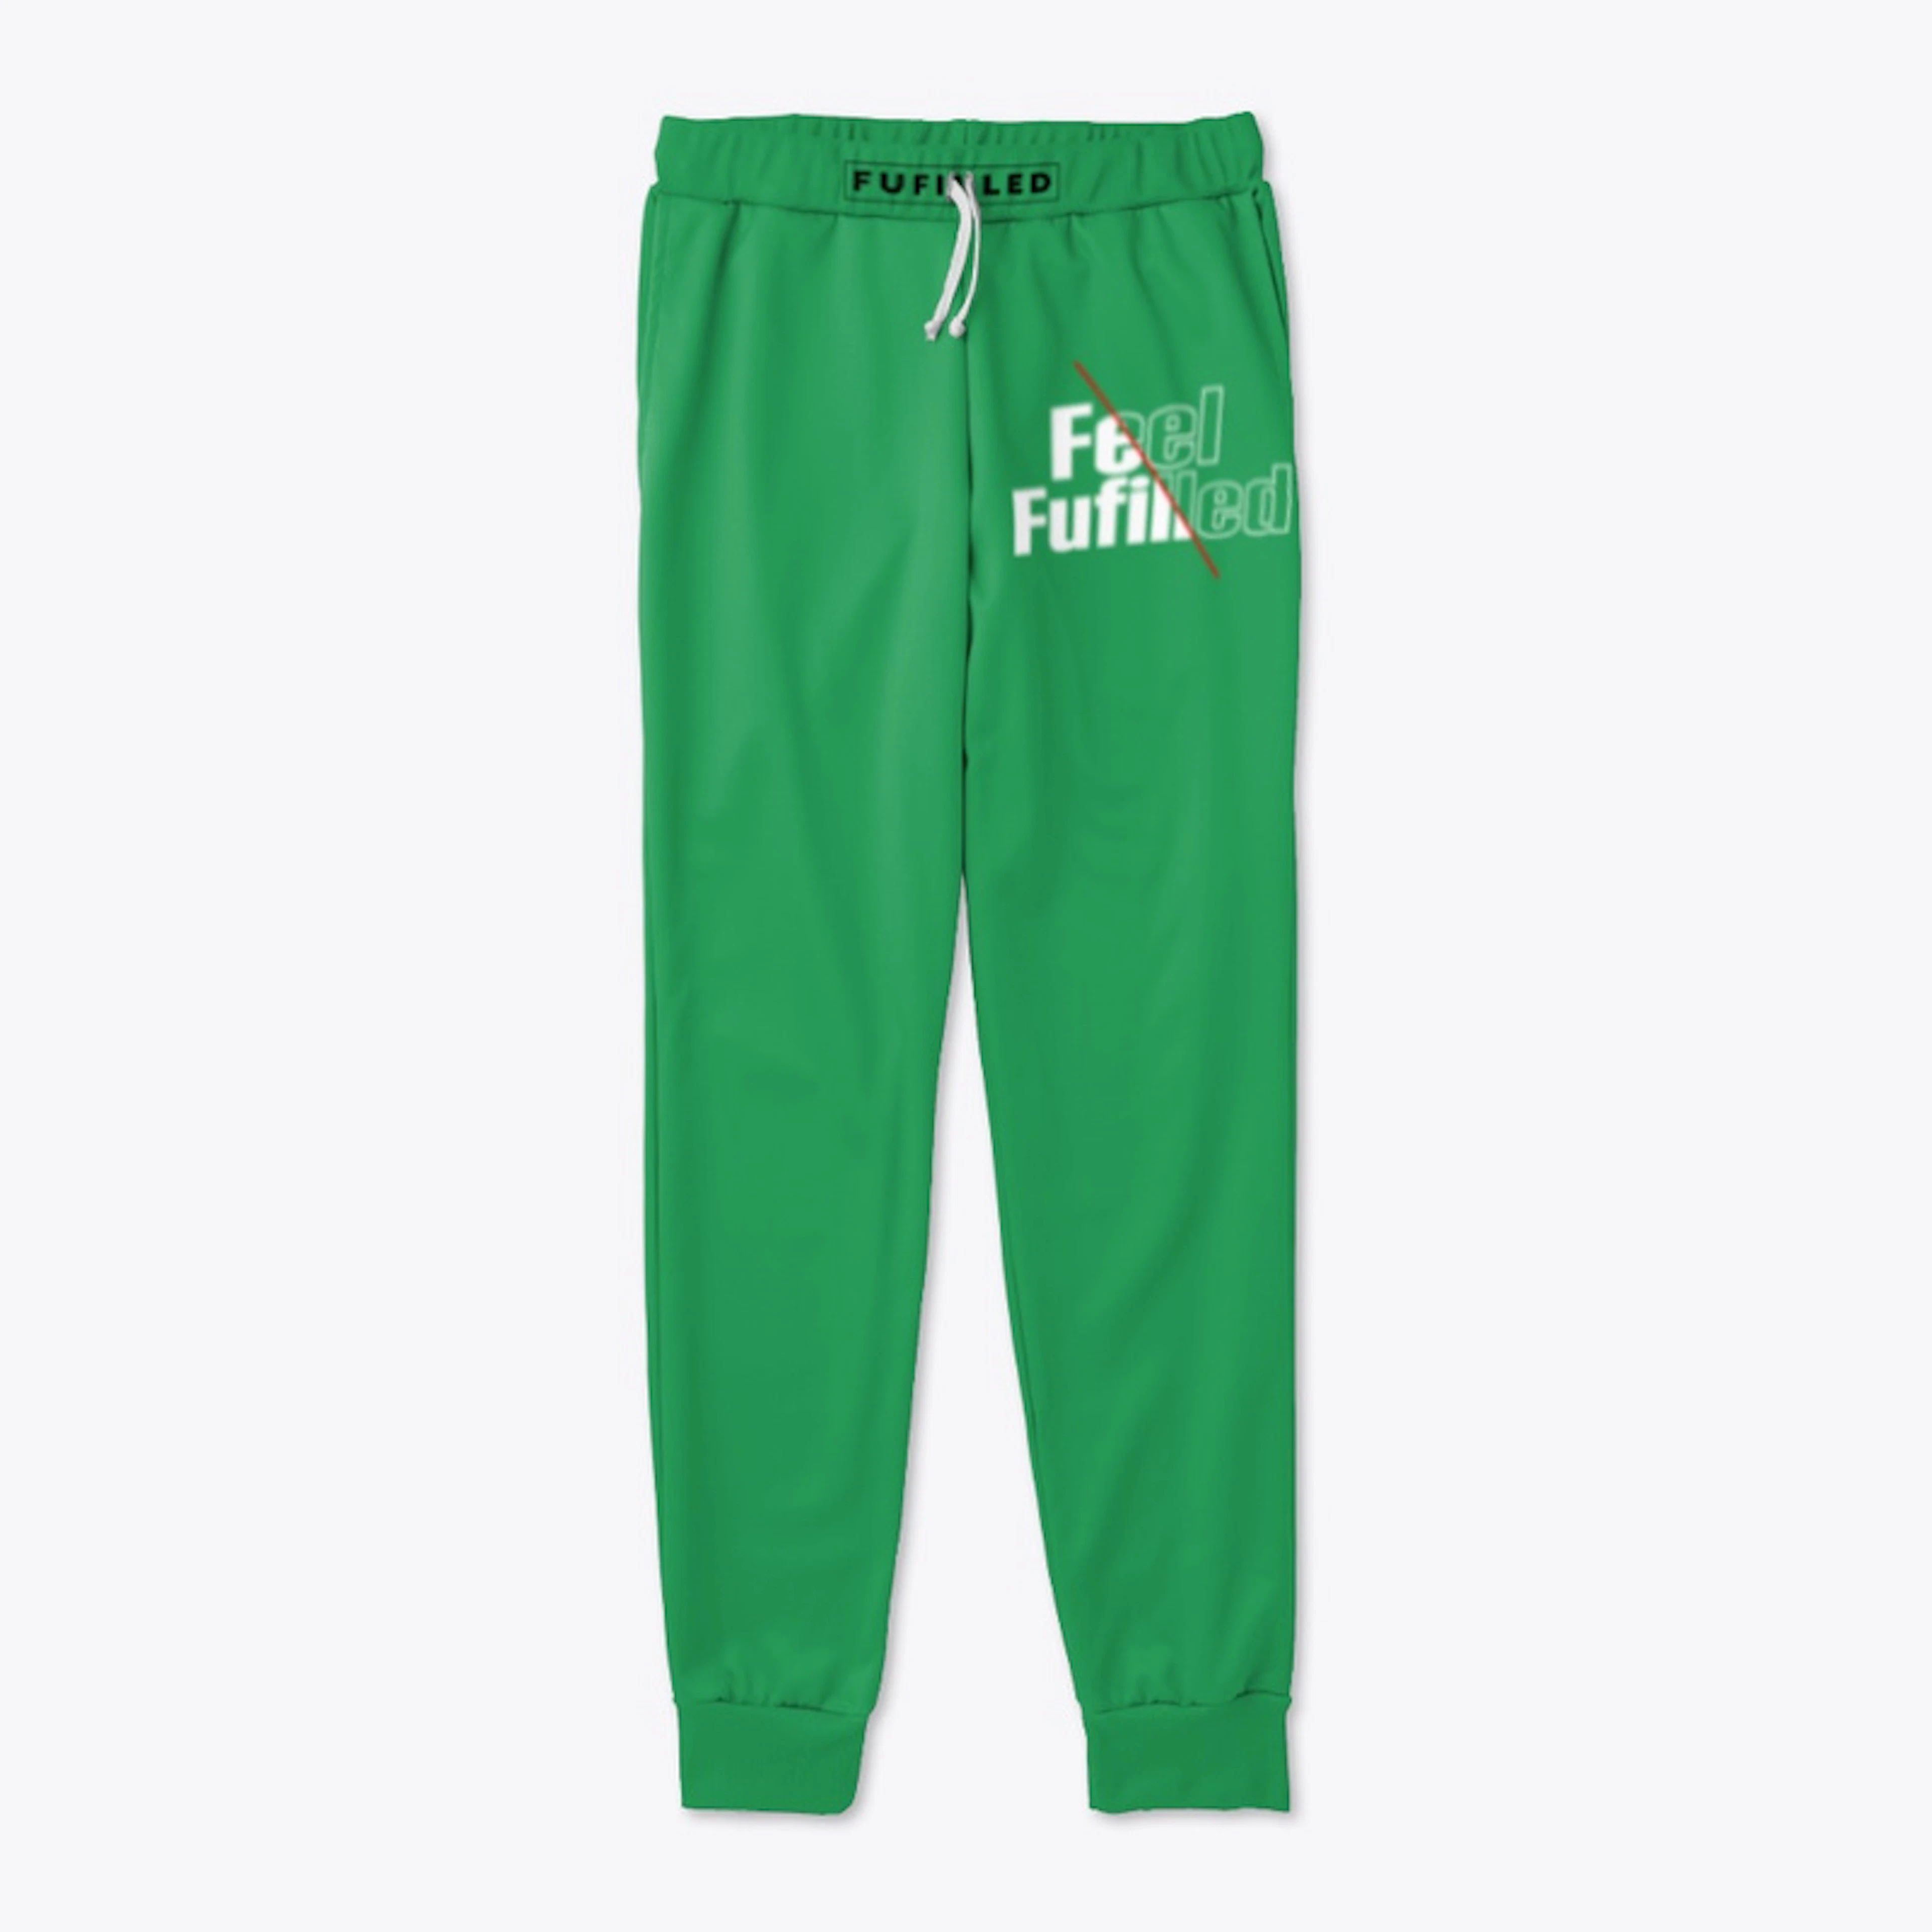 Feel Fufilled Serious Joggers